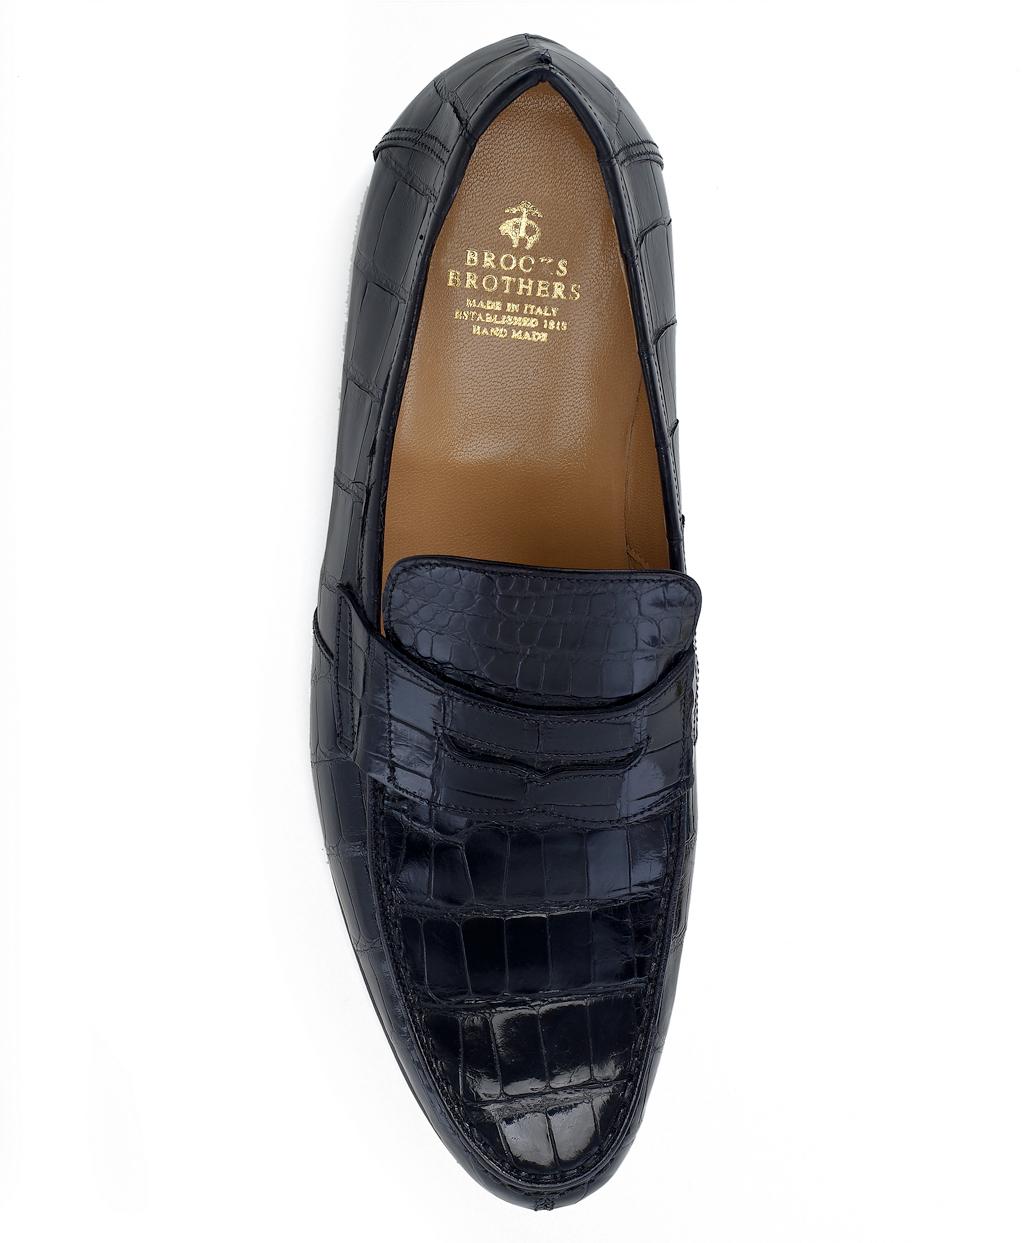 Brooks Brothers Leather Alligator Penny Loafers in Black for Men - Lyst